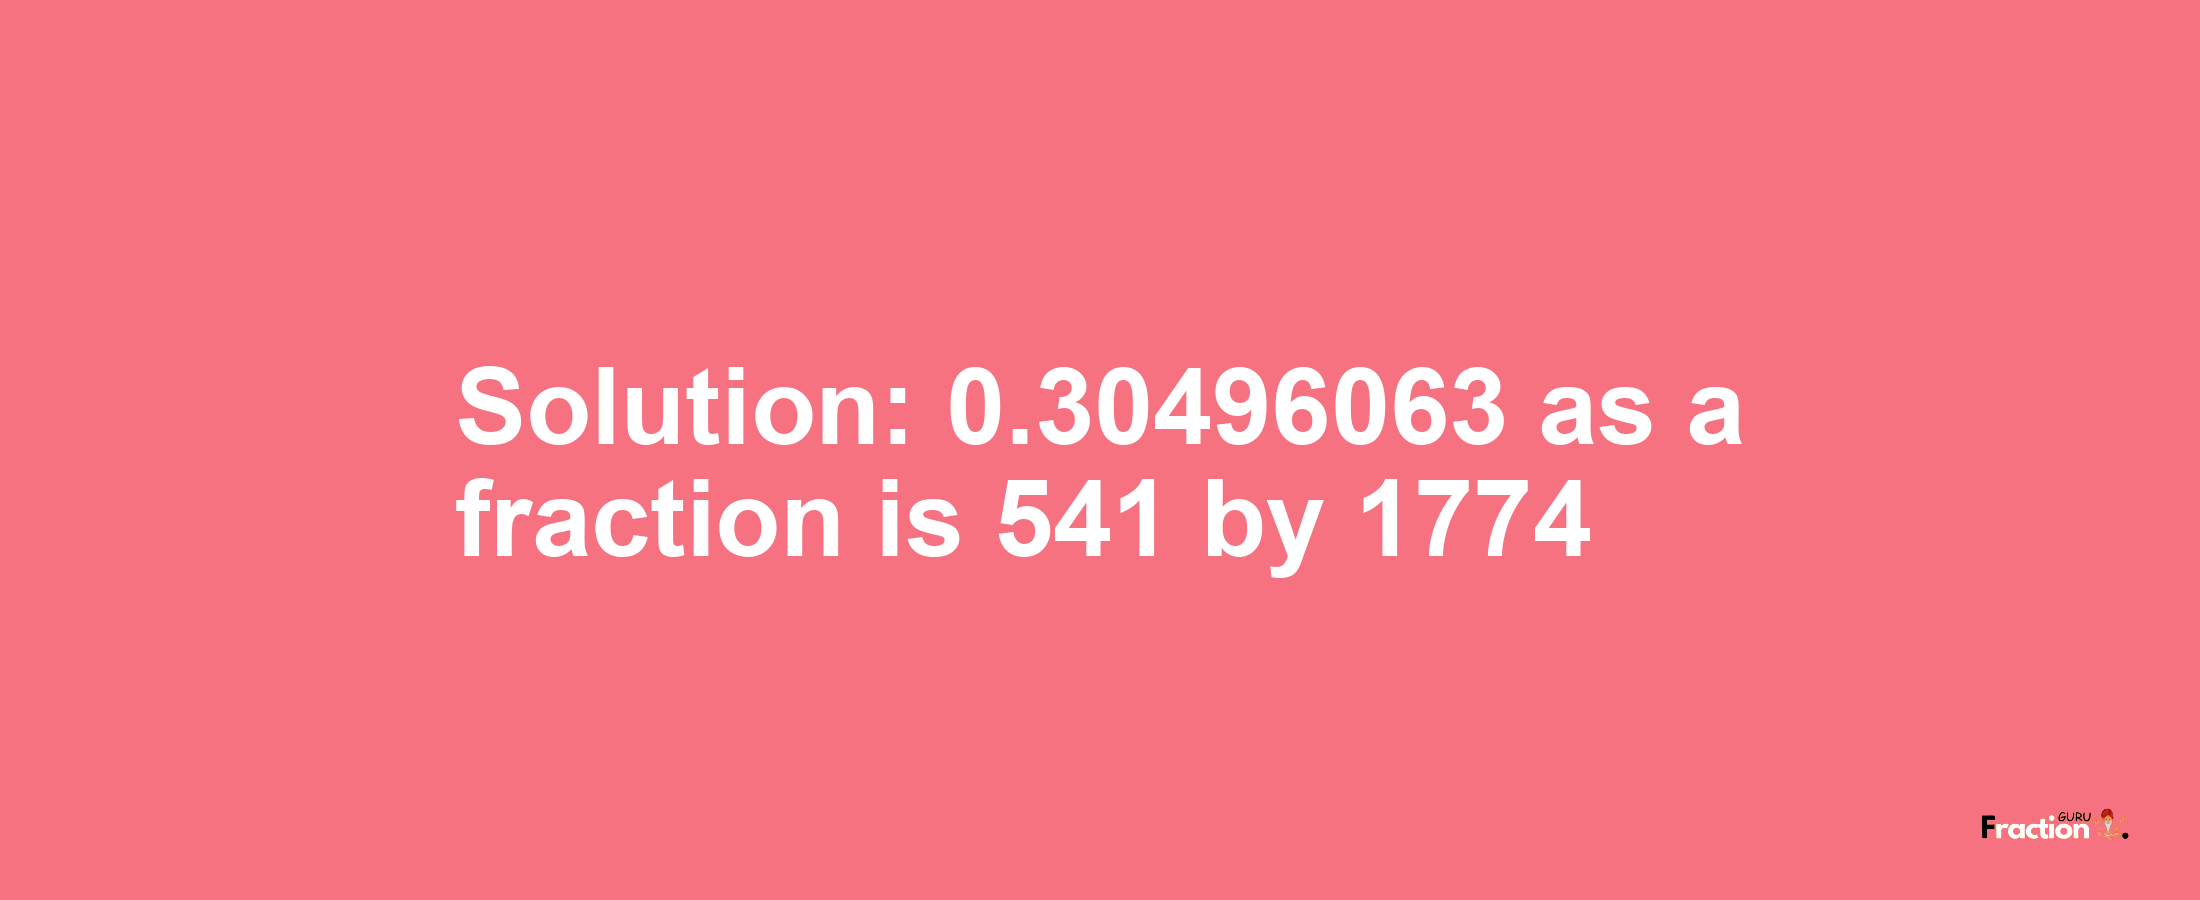 Solution:0.30496063 as a fraction is 541/1774